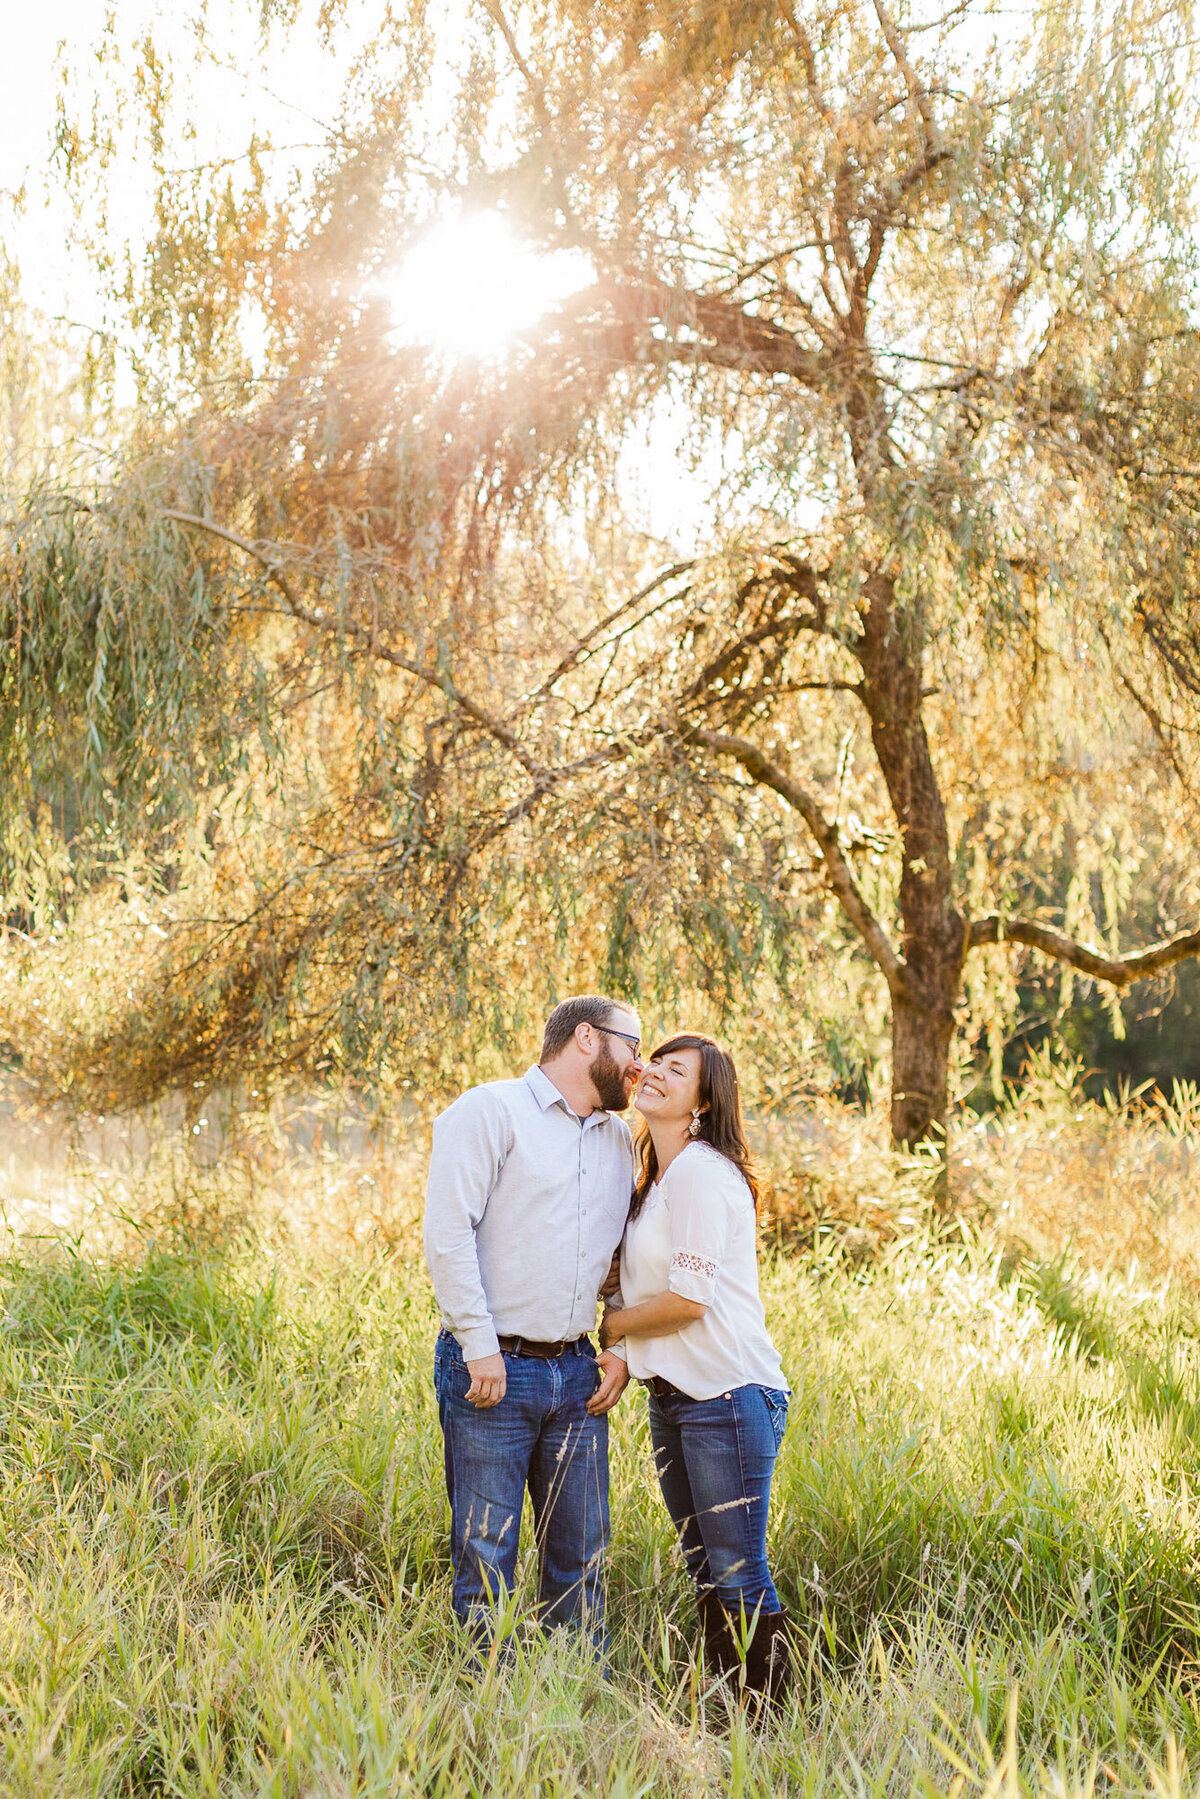 Beautiful golden hour engagement session in field in Woodiville WA willow tree happy couple laughing colorful candid photo by Joanna Monger Photography